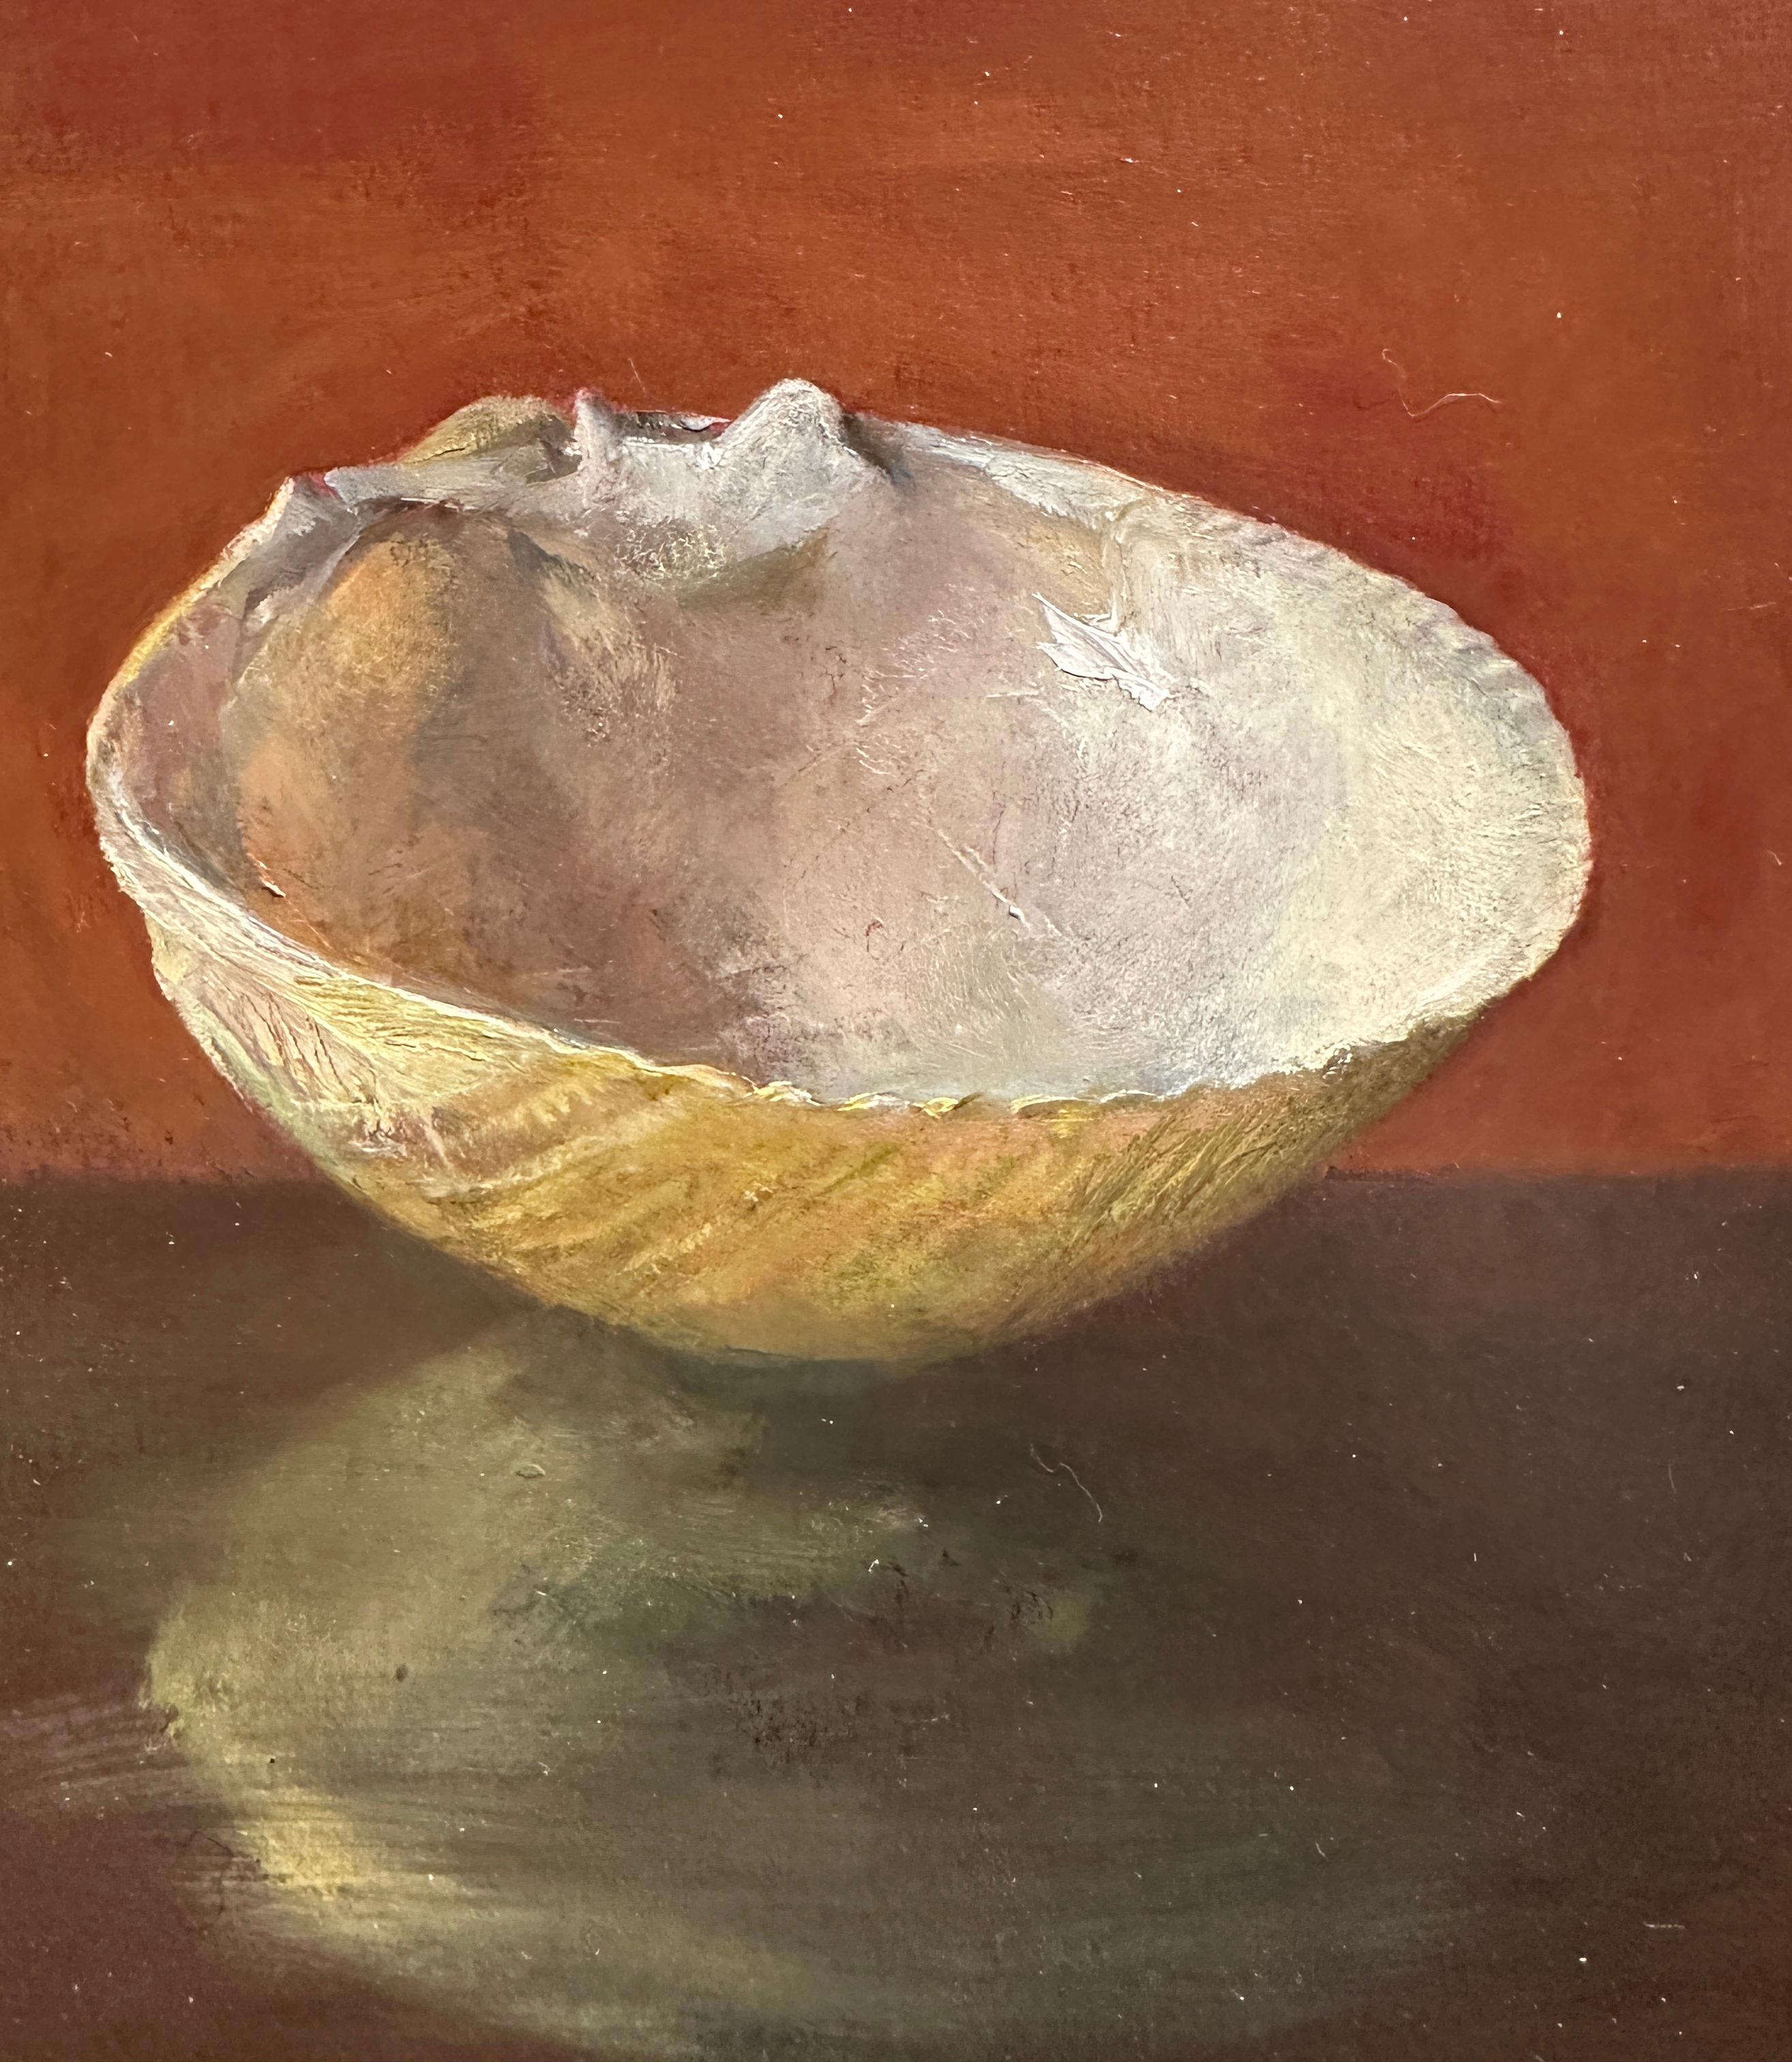 Hand-Painted Clam Shell and Onion Shell, Oil on Panel Still Life Painting with Two Sea Shells